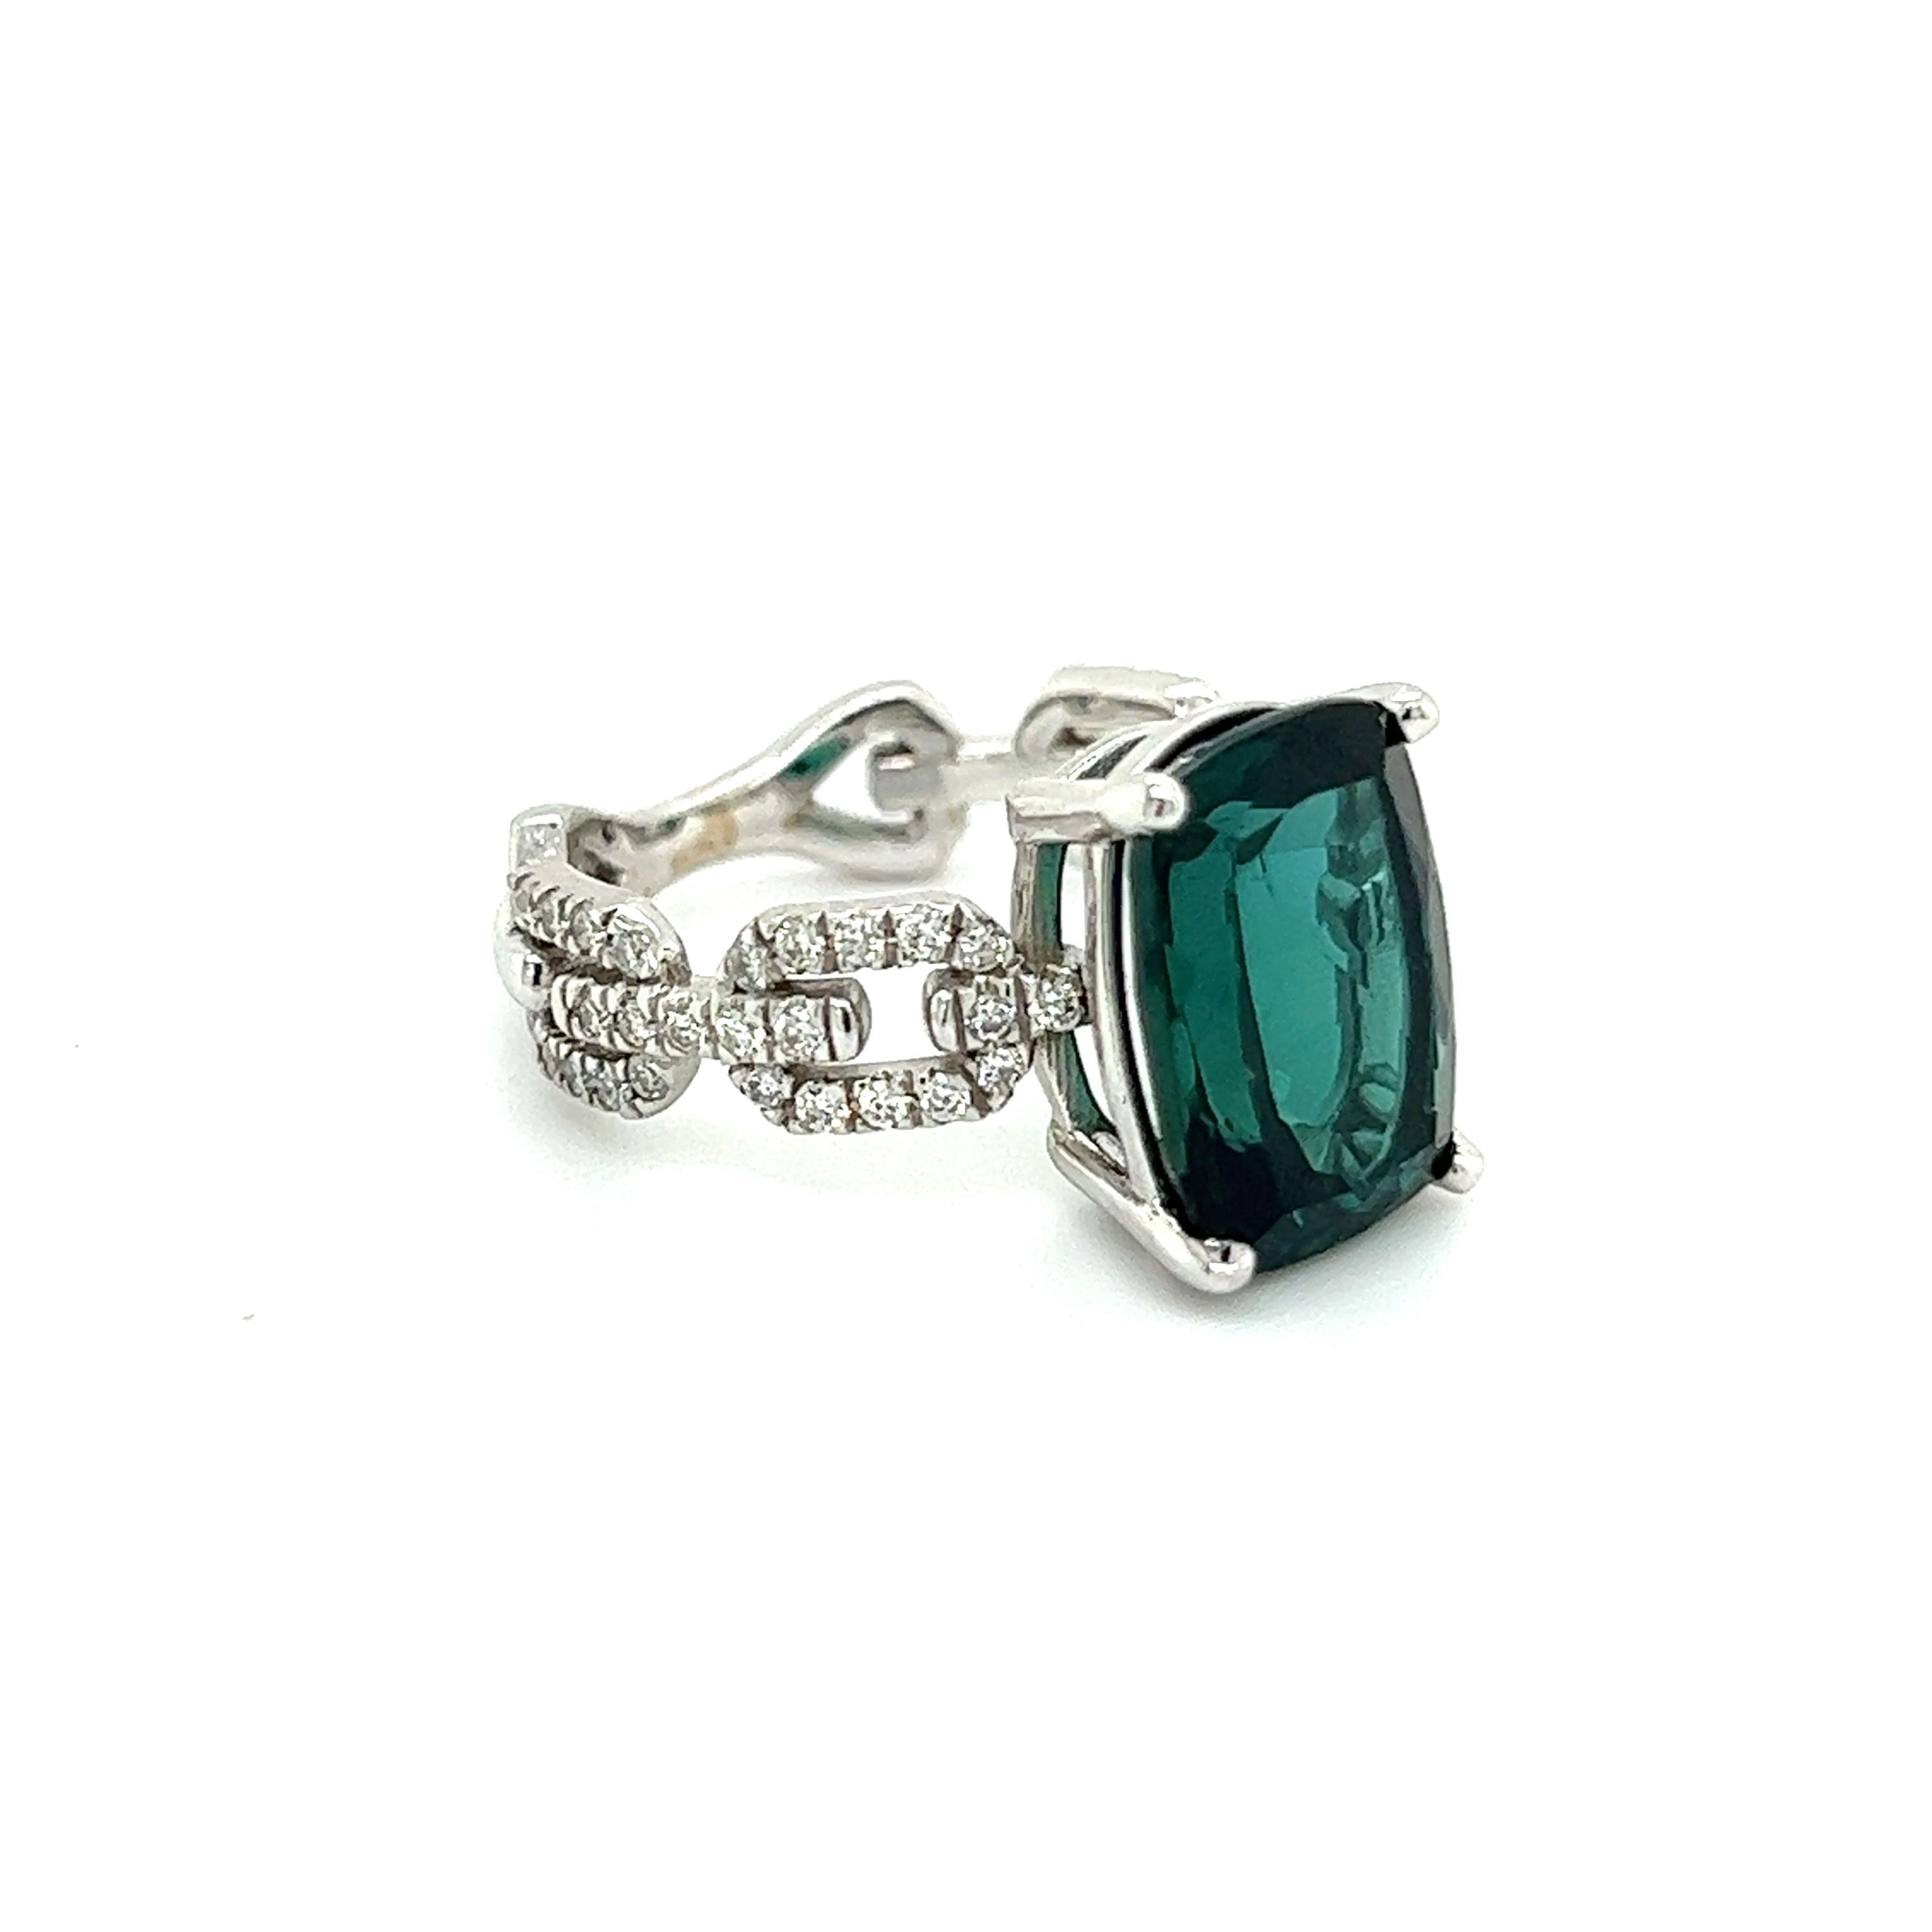 Natural Tourmaline Diamond Ring 6.5 14k White Gold 6.32 TCW Certified For Sale 1